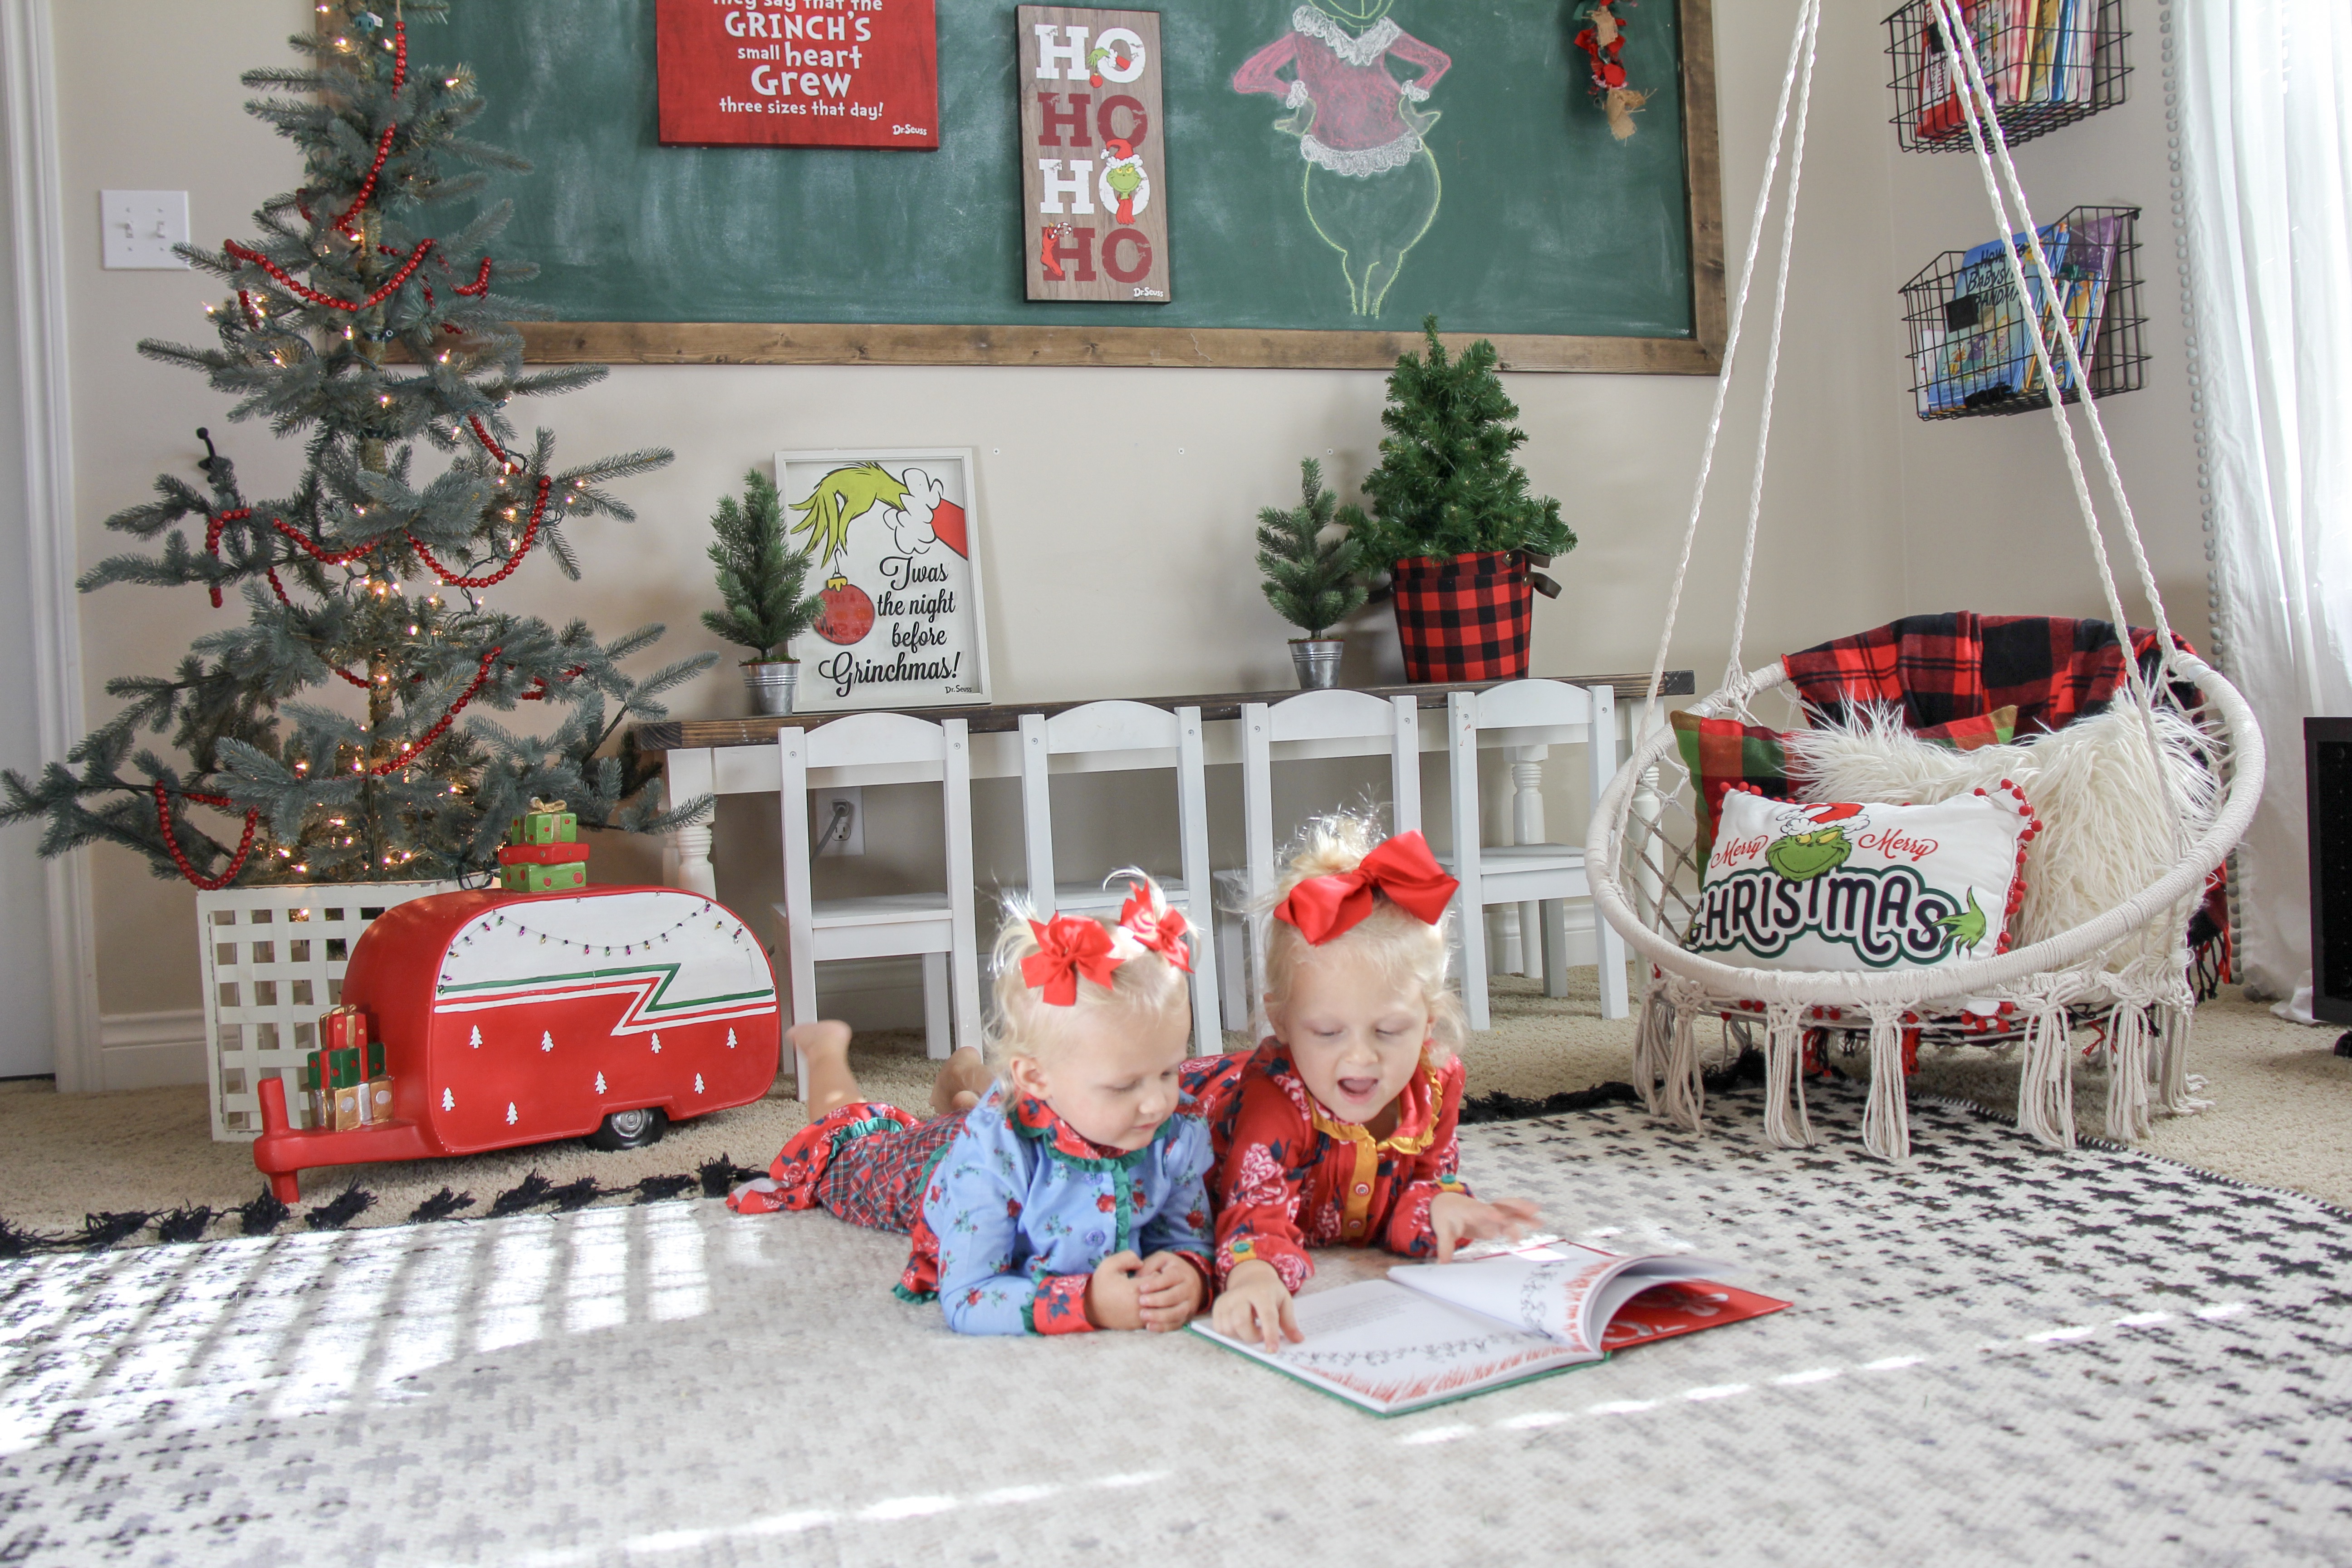 Our Playroom decorated for Christmas – Grinch Style